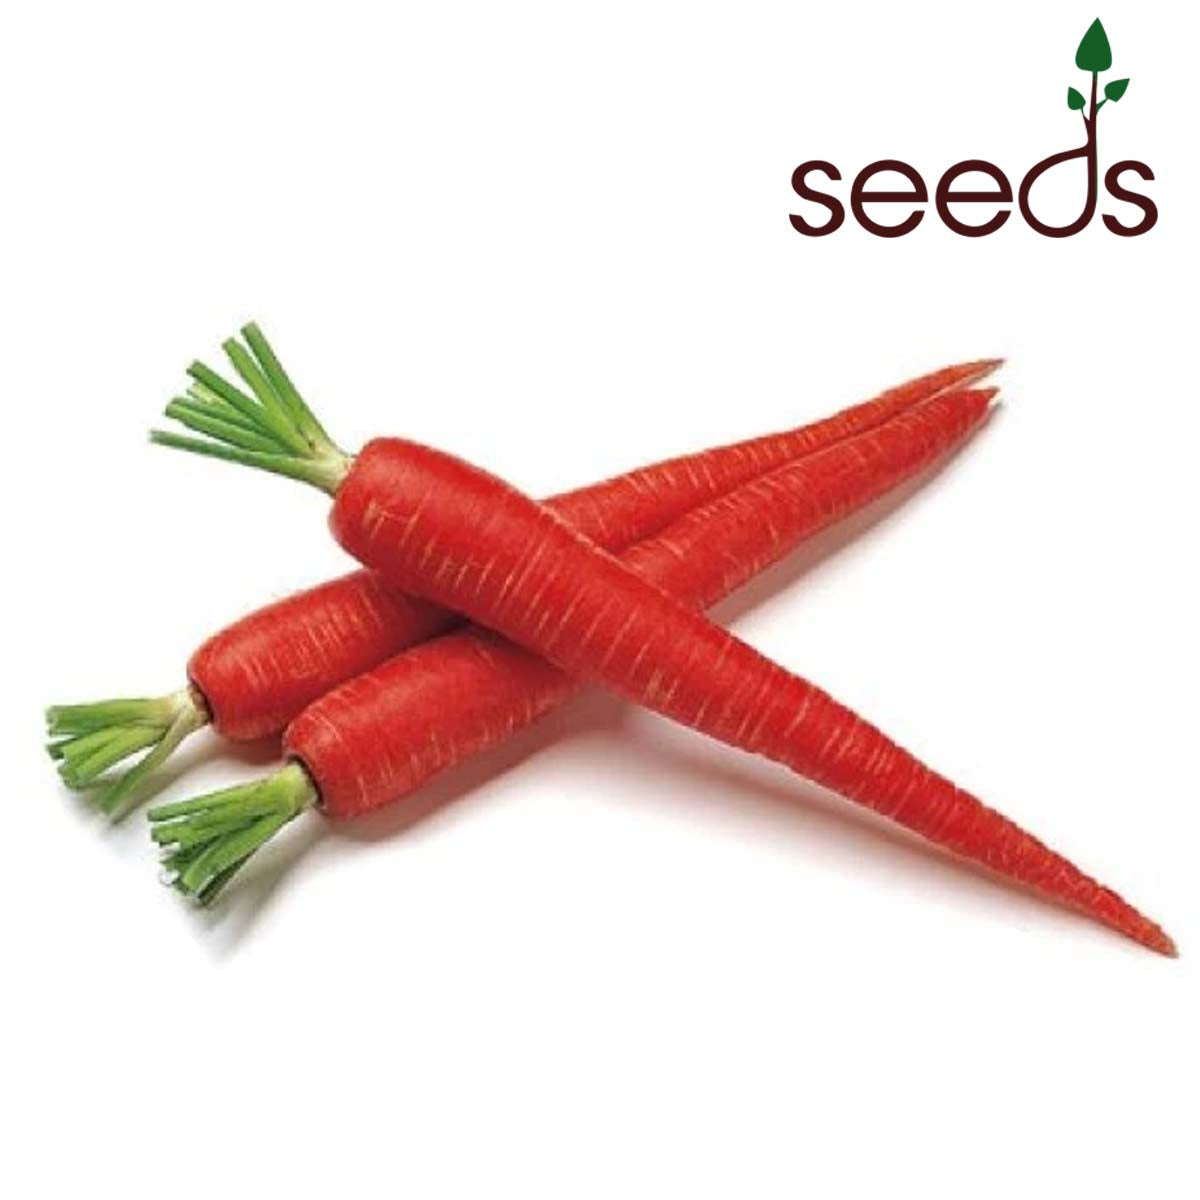 Carrot Red Long - 100 Seeds